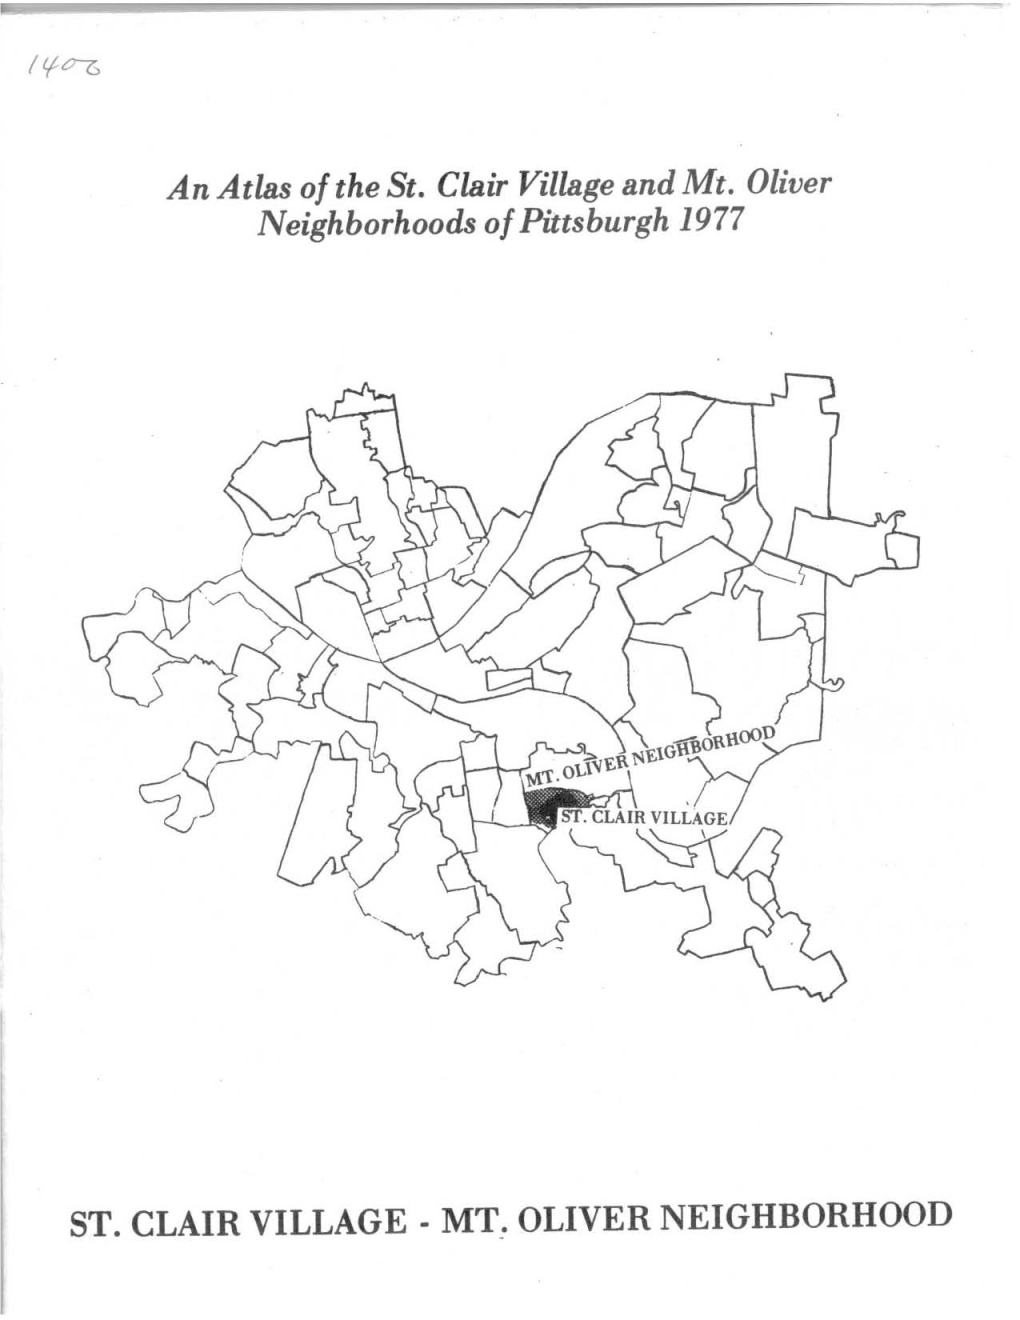 An Atlas of the St. Clair Village and Mt. Oliver Neighborhoods of Pittsburgh 1977